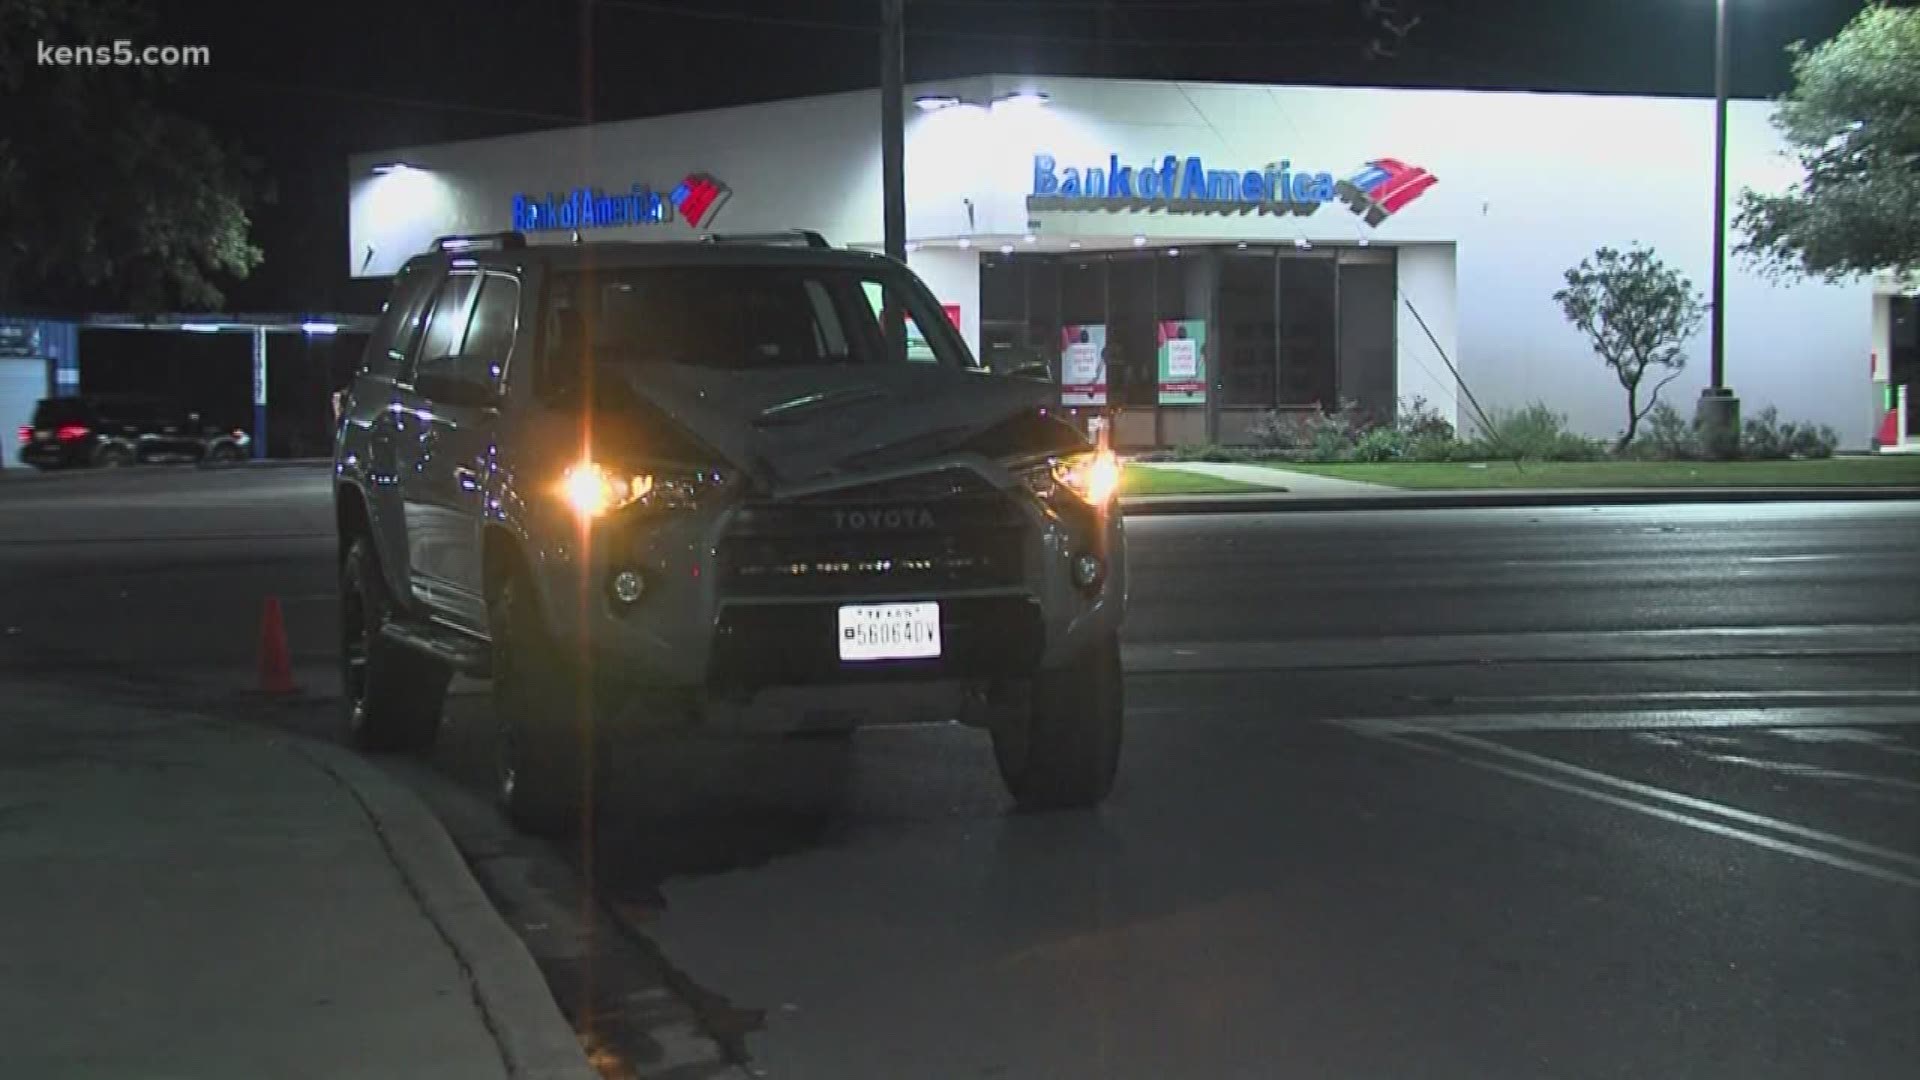 A man was hit by an SUV while trying to cross the street.